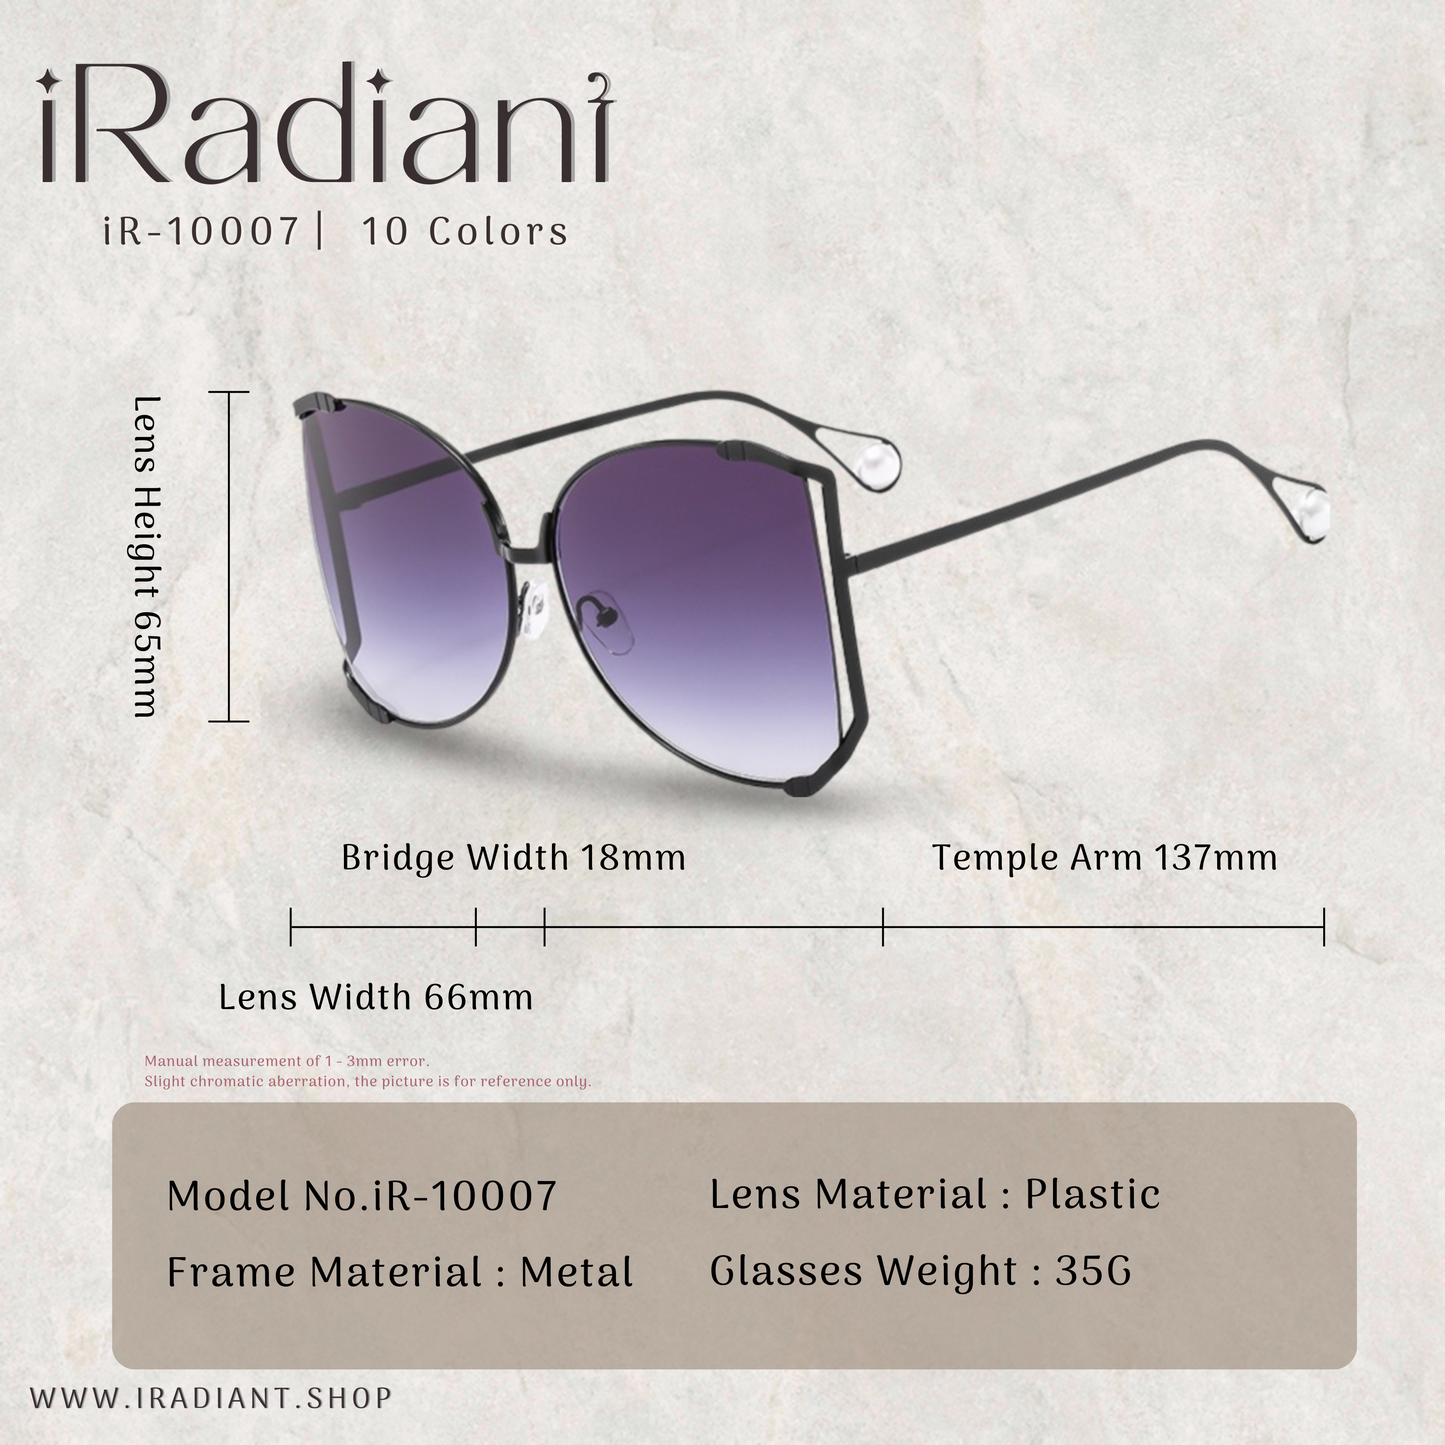 iR-10007-I︳iRadiant Semi-Rimless With Pearls Design Temple Arm Shades ︳For Women's ︳Gold